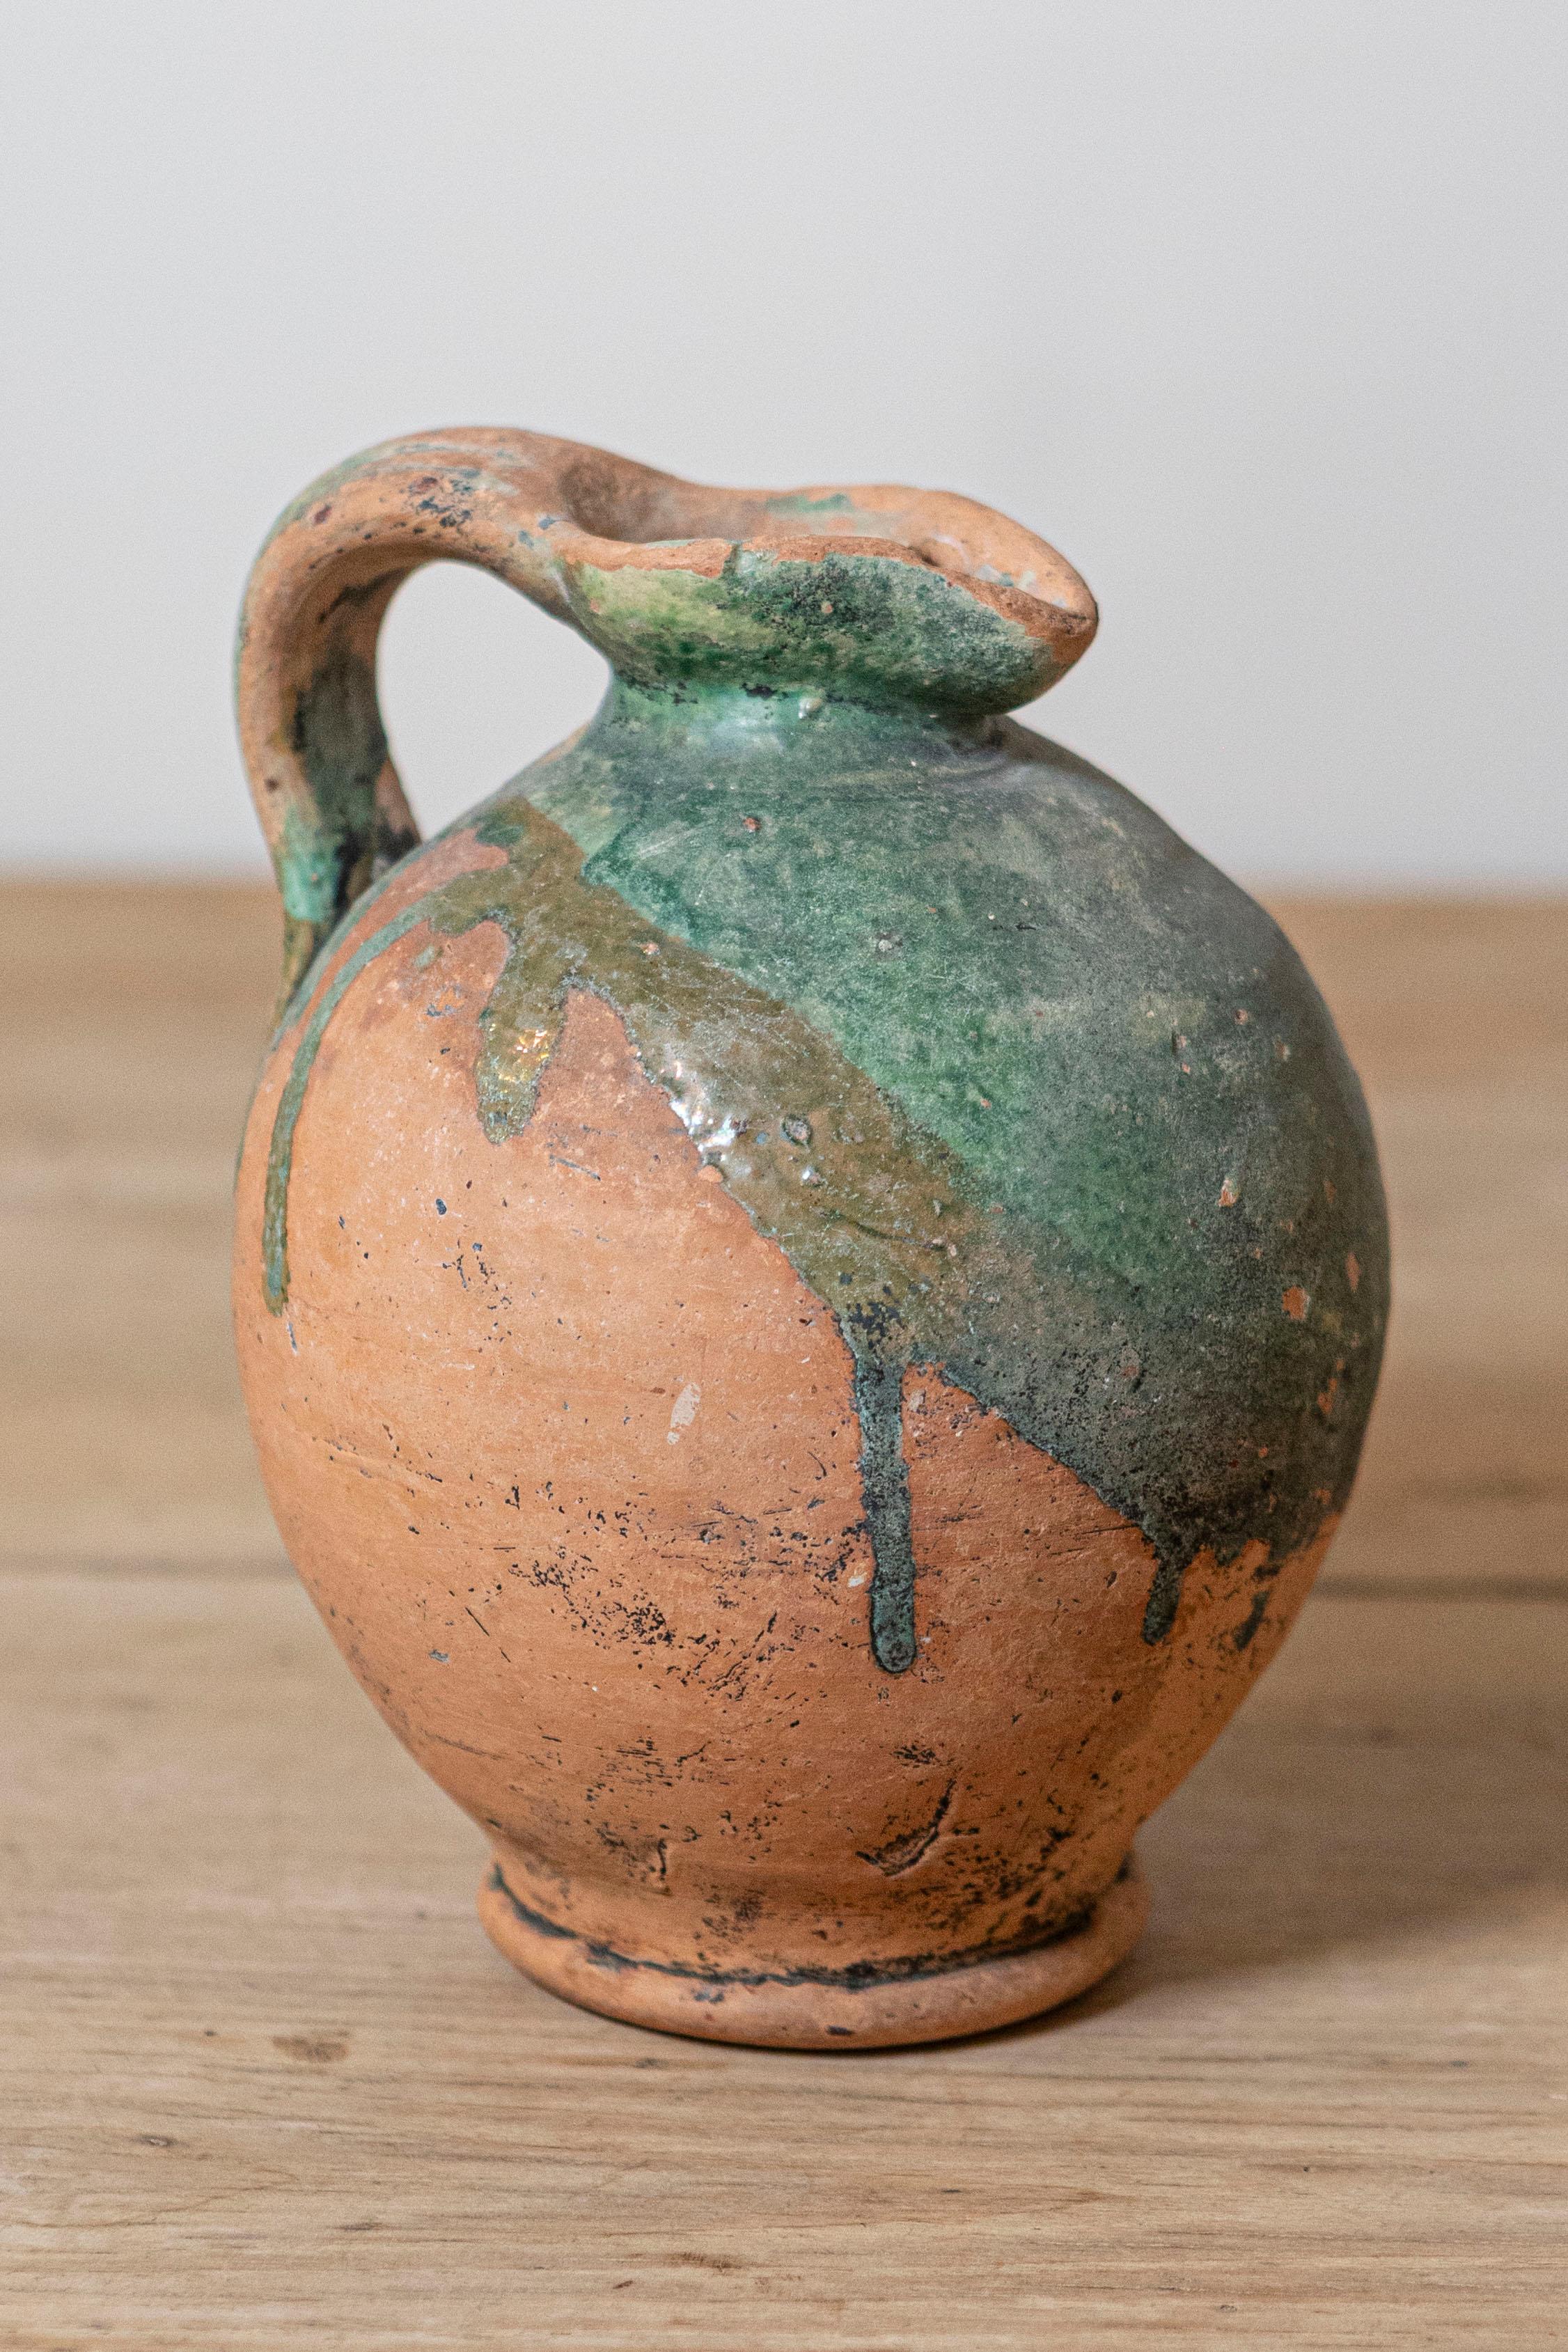 Rustic French Provincial 19th Century Pottery Jug with Green Glazed Accents In Good Condition For Sale In Atlanta, GA